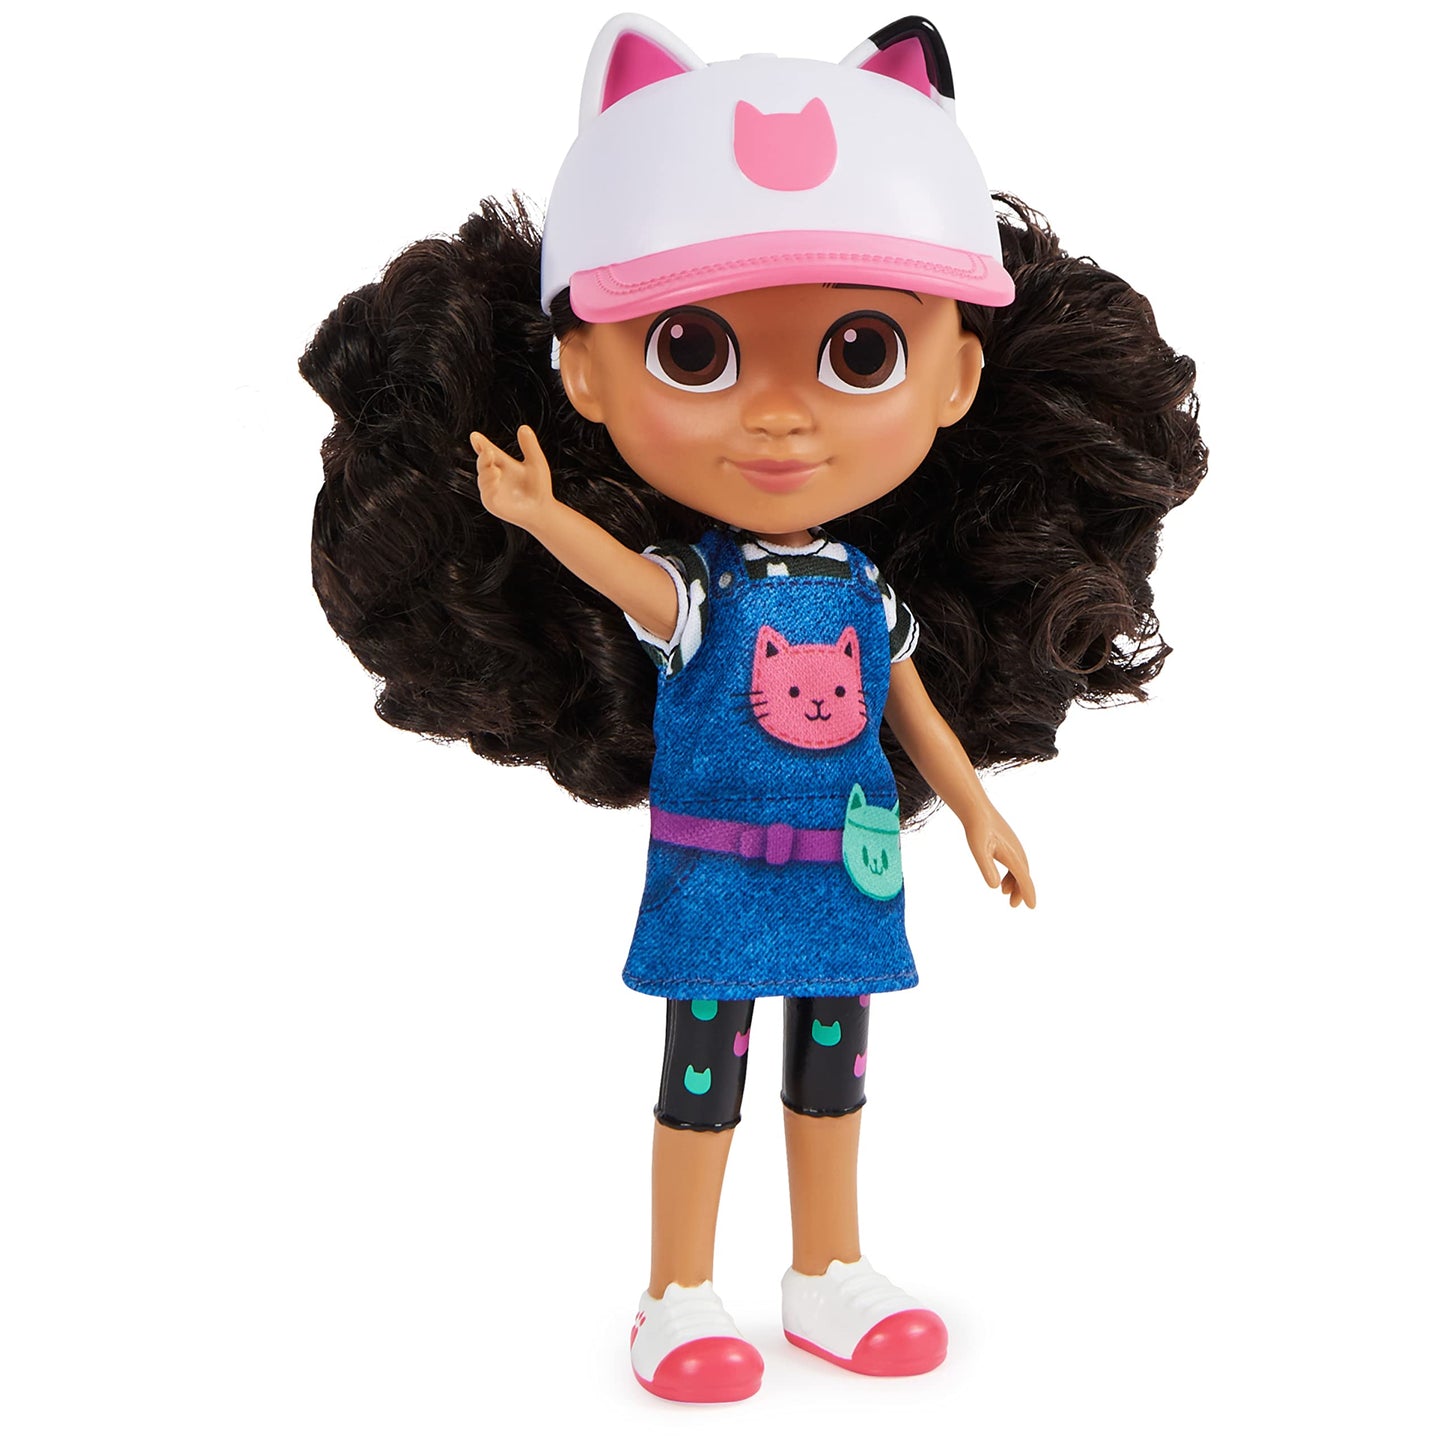 Gabby's Dollhouse, 8-inch Gabby Girl Doll (Travel Edition) with Accessories, Kids Toys for Ages 3 and up